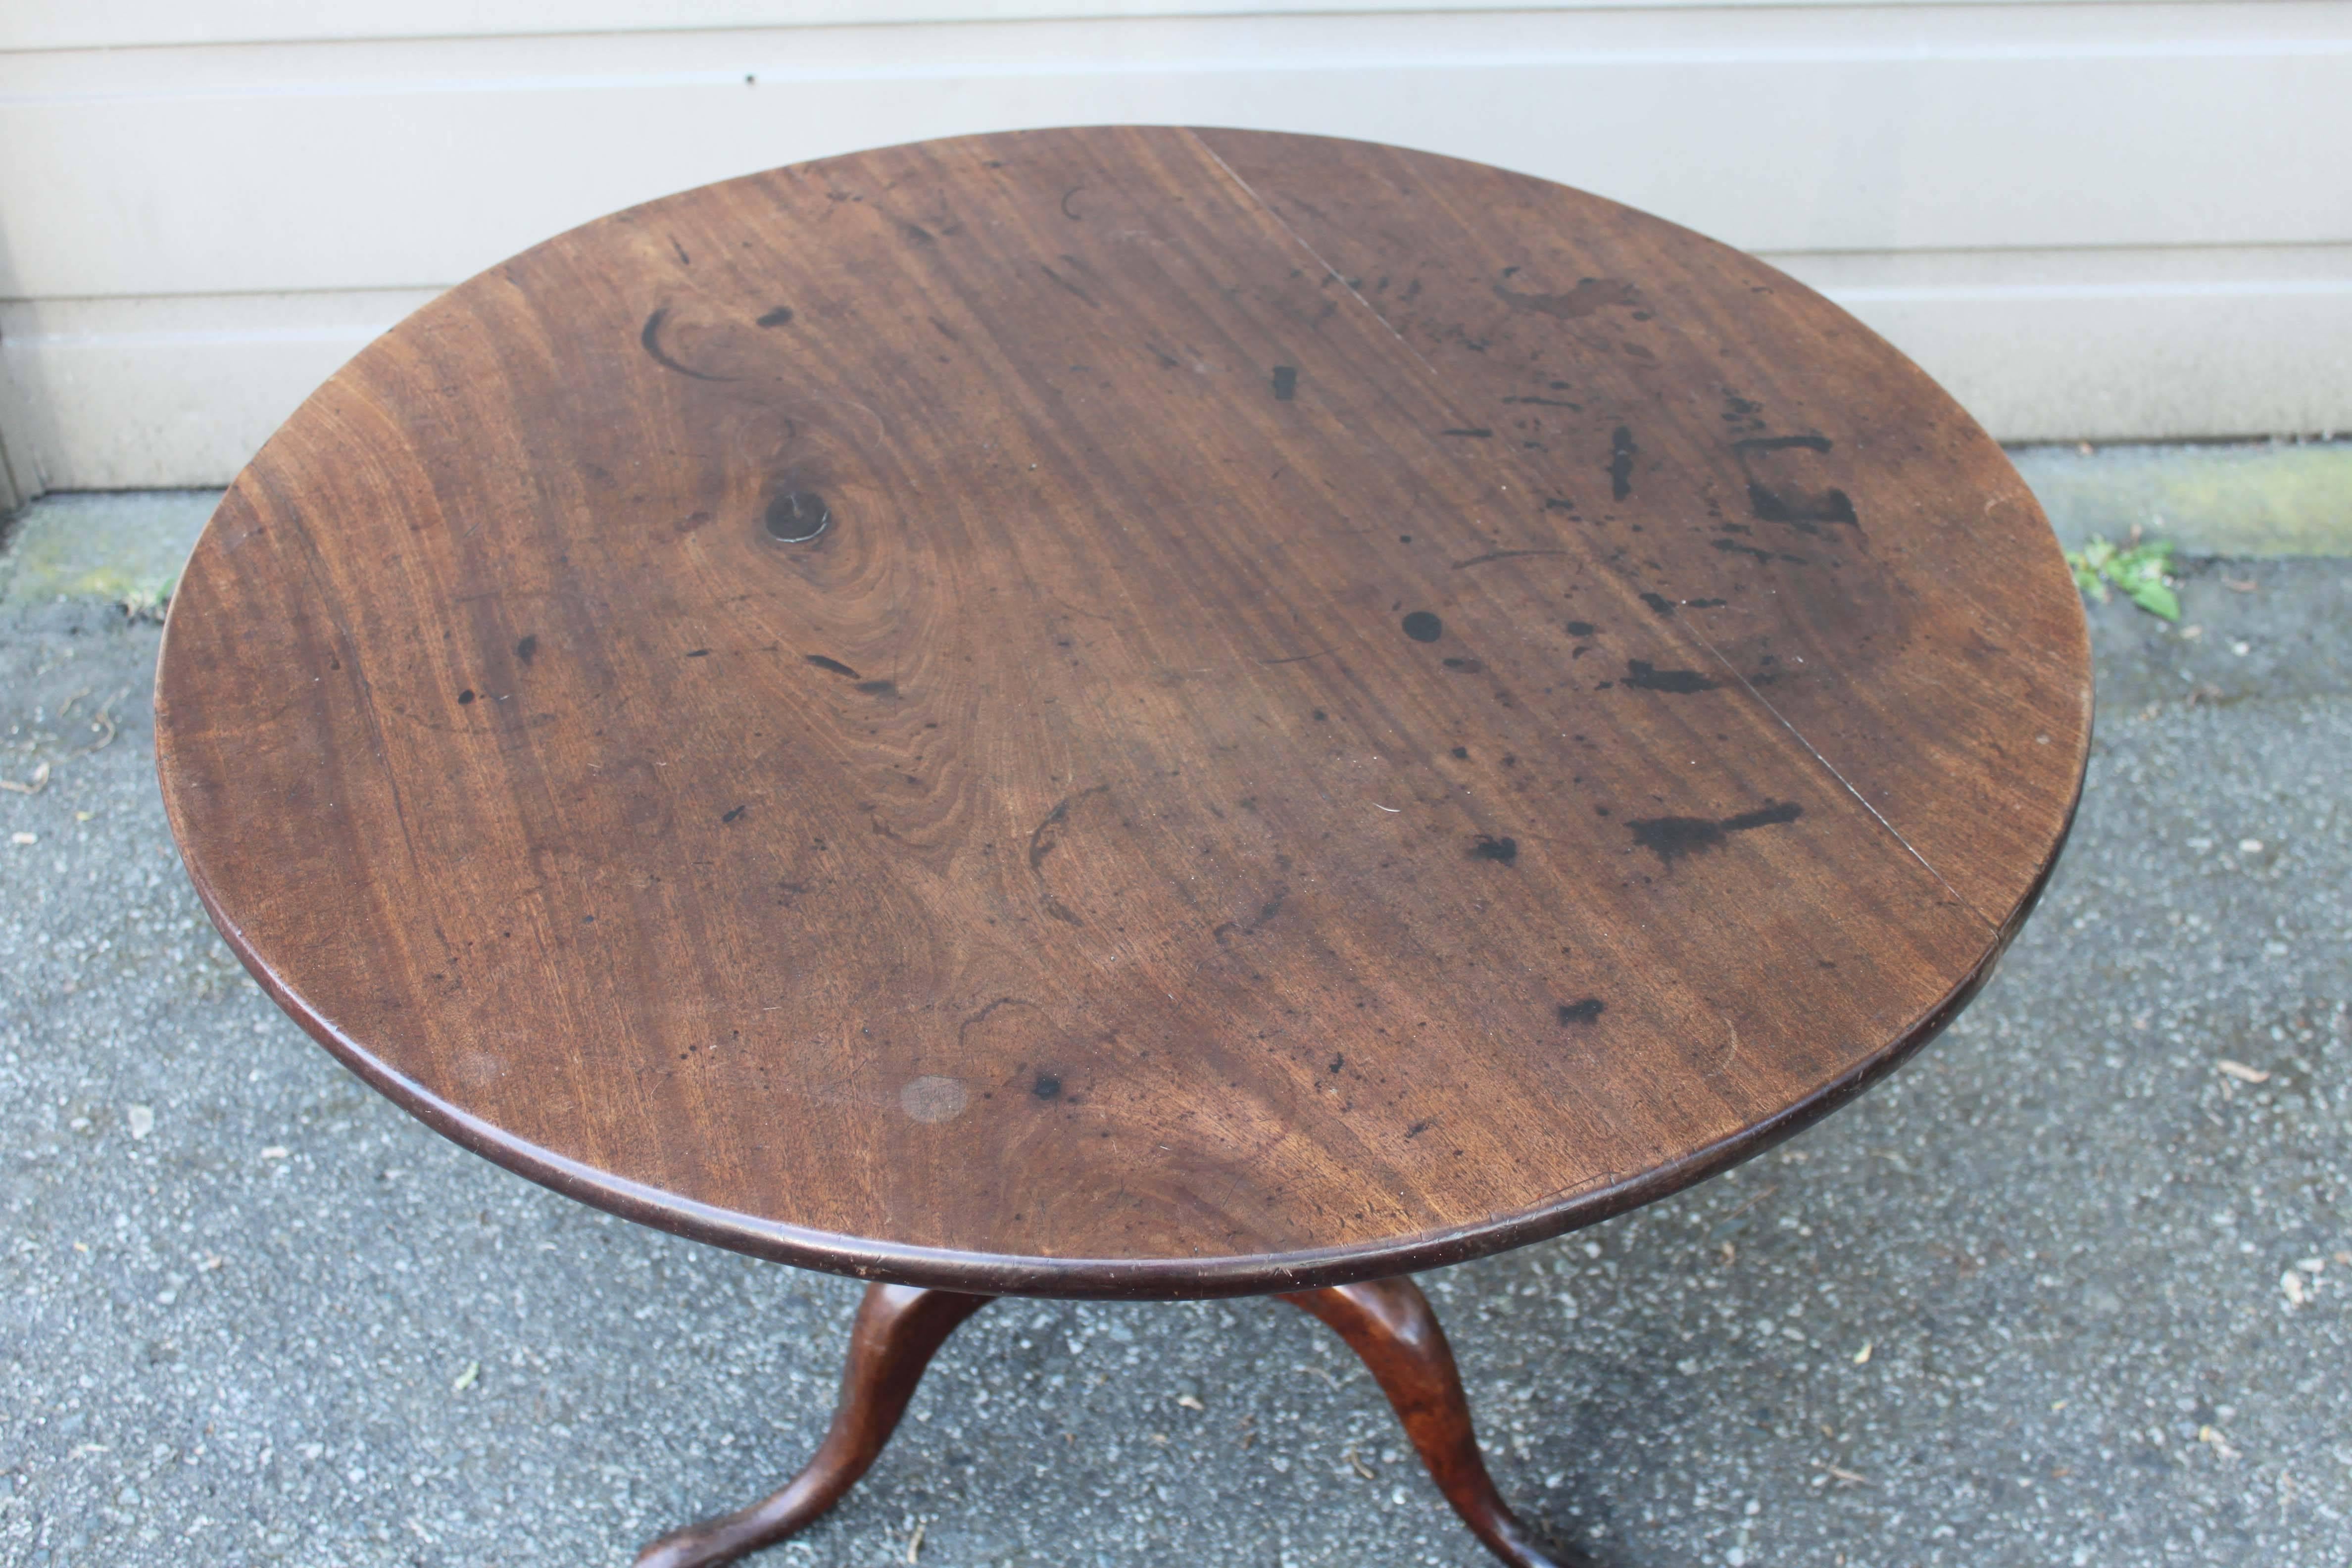 Mahogany tilt-top table in the Queen Anne style, circa early 19th century. Original hardware, note the wear and apparent age over the top surface.